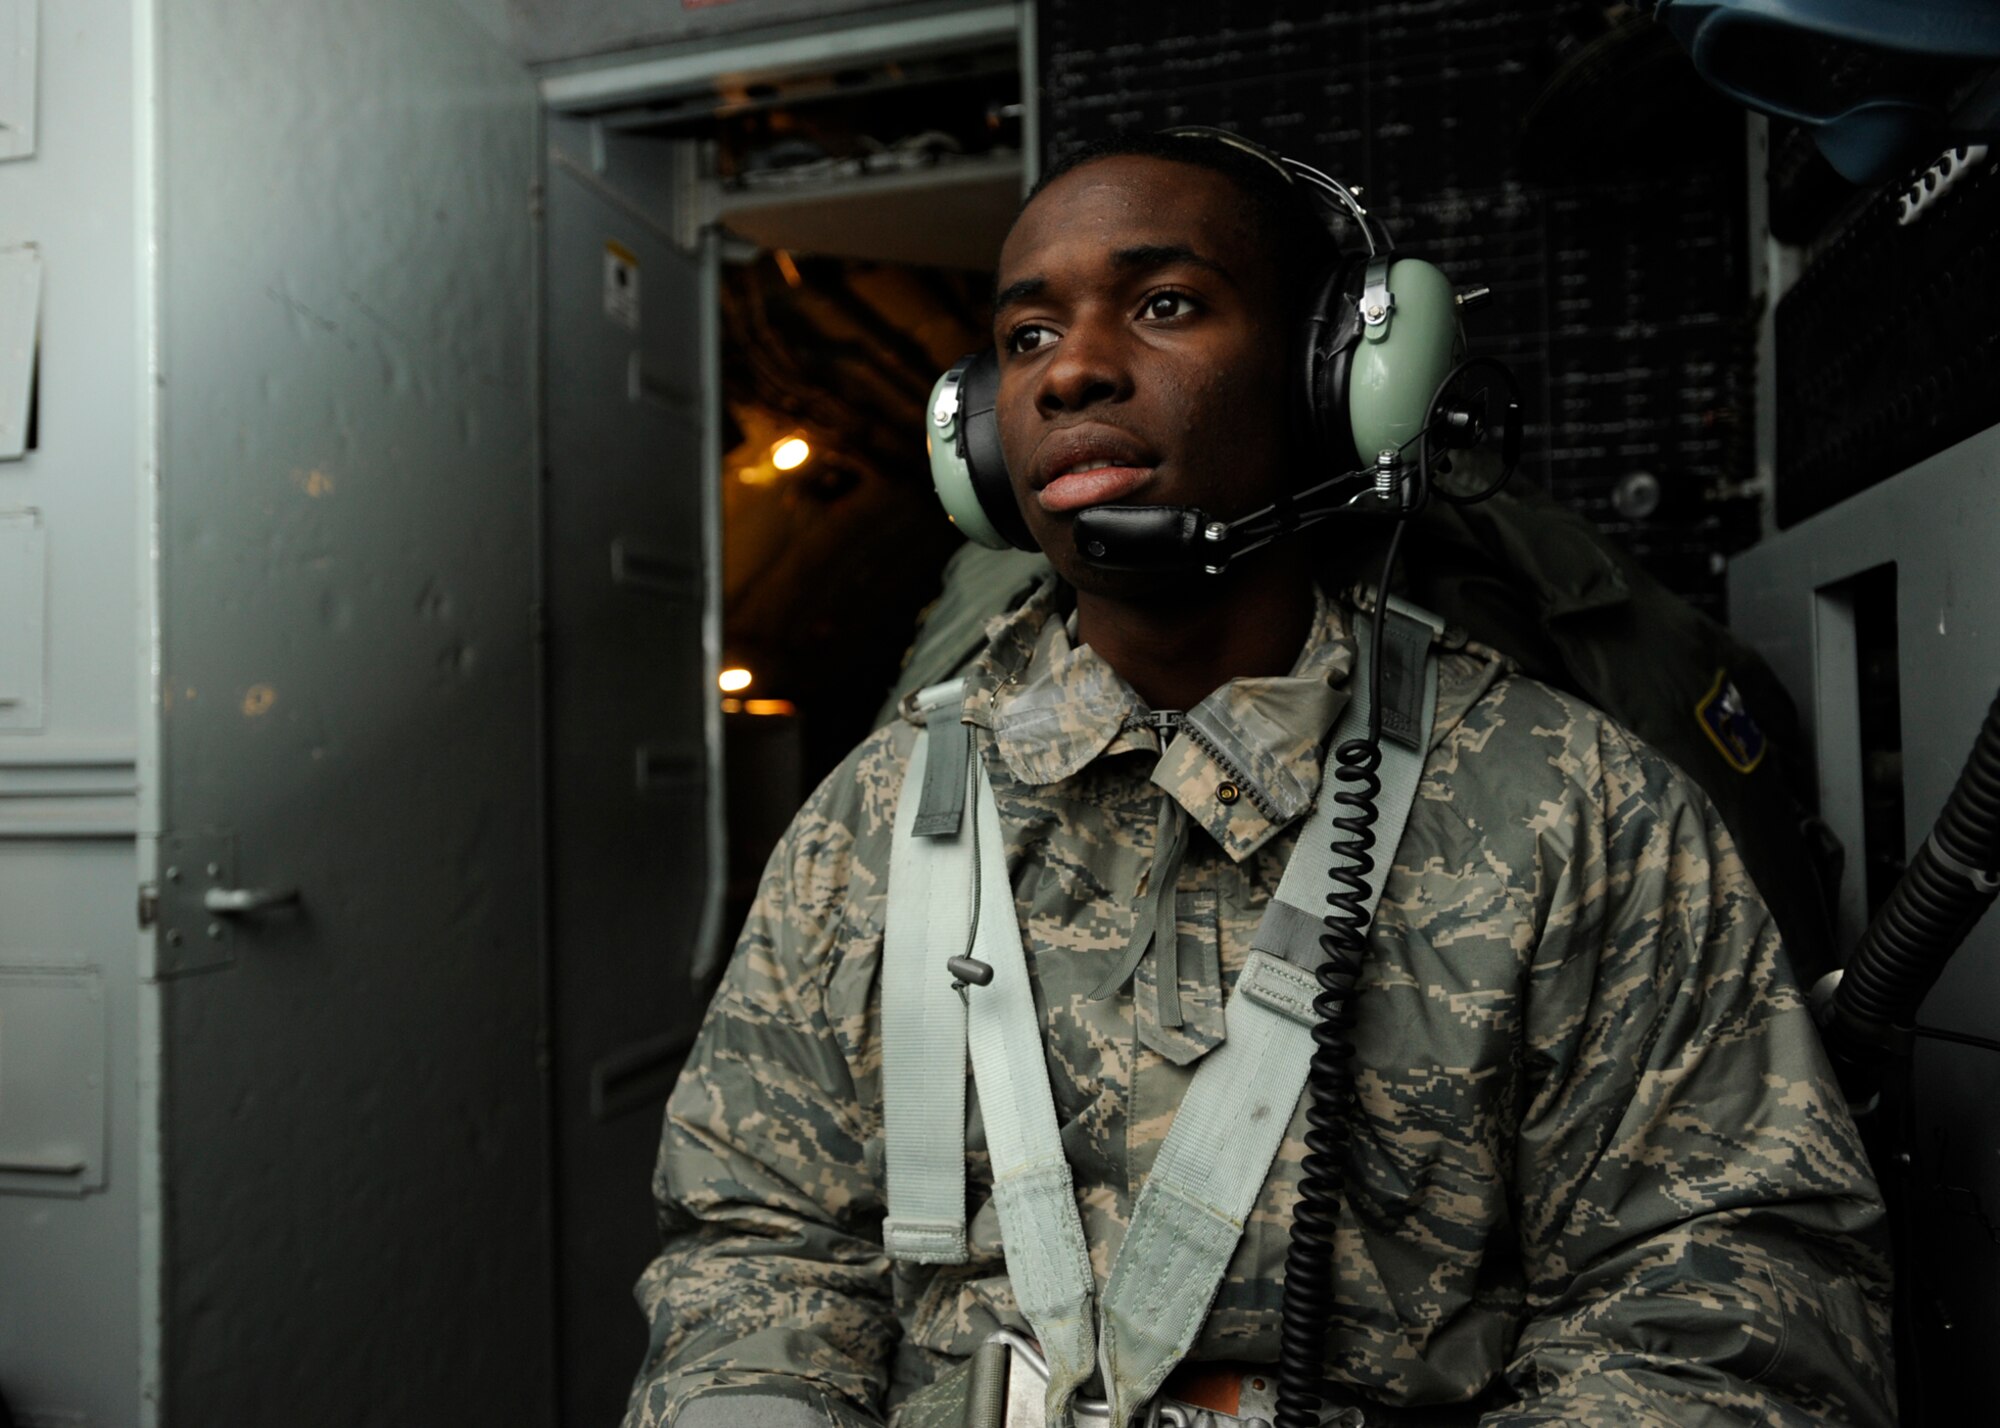 Airman Timothy Lollis sits in the cockpit of a KC-135 Stratotanker just prior to it taking off from McConnell Air Force Base, Kan., on Jan. 10. Airman Lollis, a Philadelphia native, was part of a large group of active-duty Airmen assigned to the 22nd Air Refueling Wing who flew with a crew from the 931st Air Refueling Group during the 931st's January drill weekend. The 931st is an Air Force Reserve unit and the 22nd is its host unit at McConnell Air Force Base, Kan. (U.S. Air Force photo/Tech. Sgt. Jason Schaap)